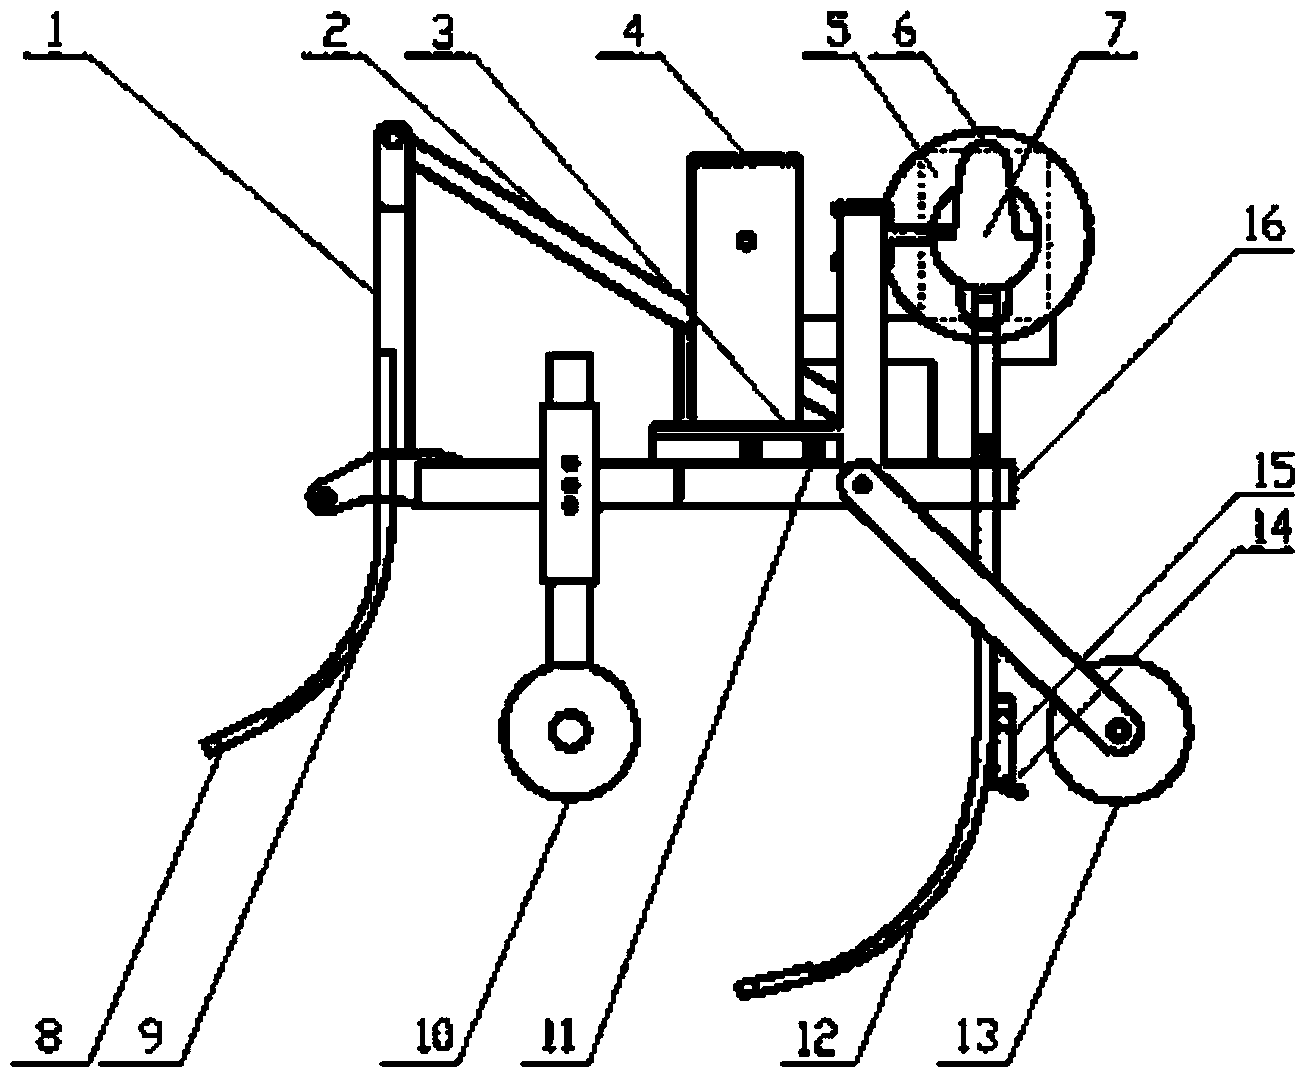 Alternate vibratory subsoiling and fertilizing all-in-one machine